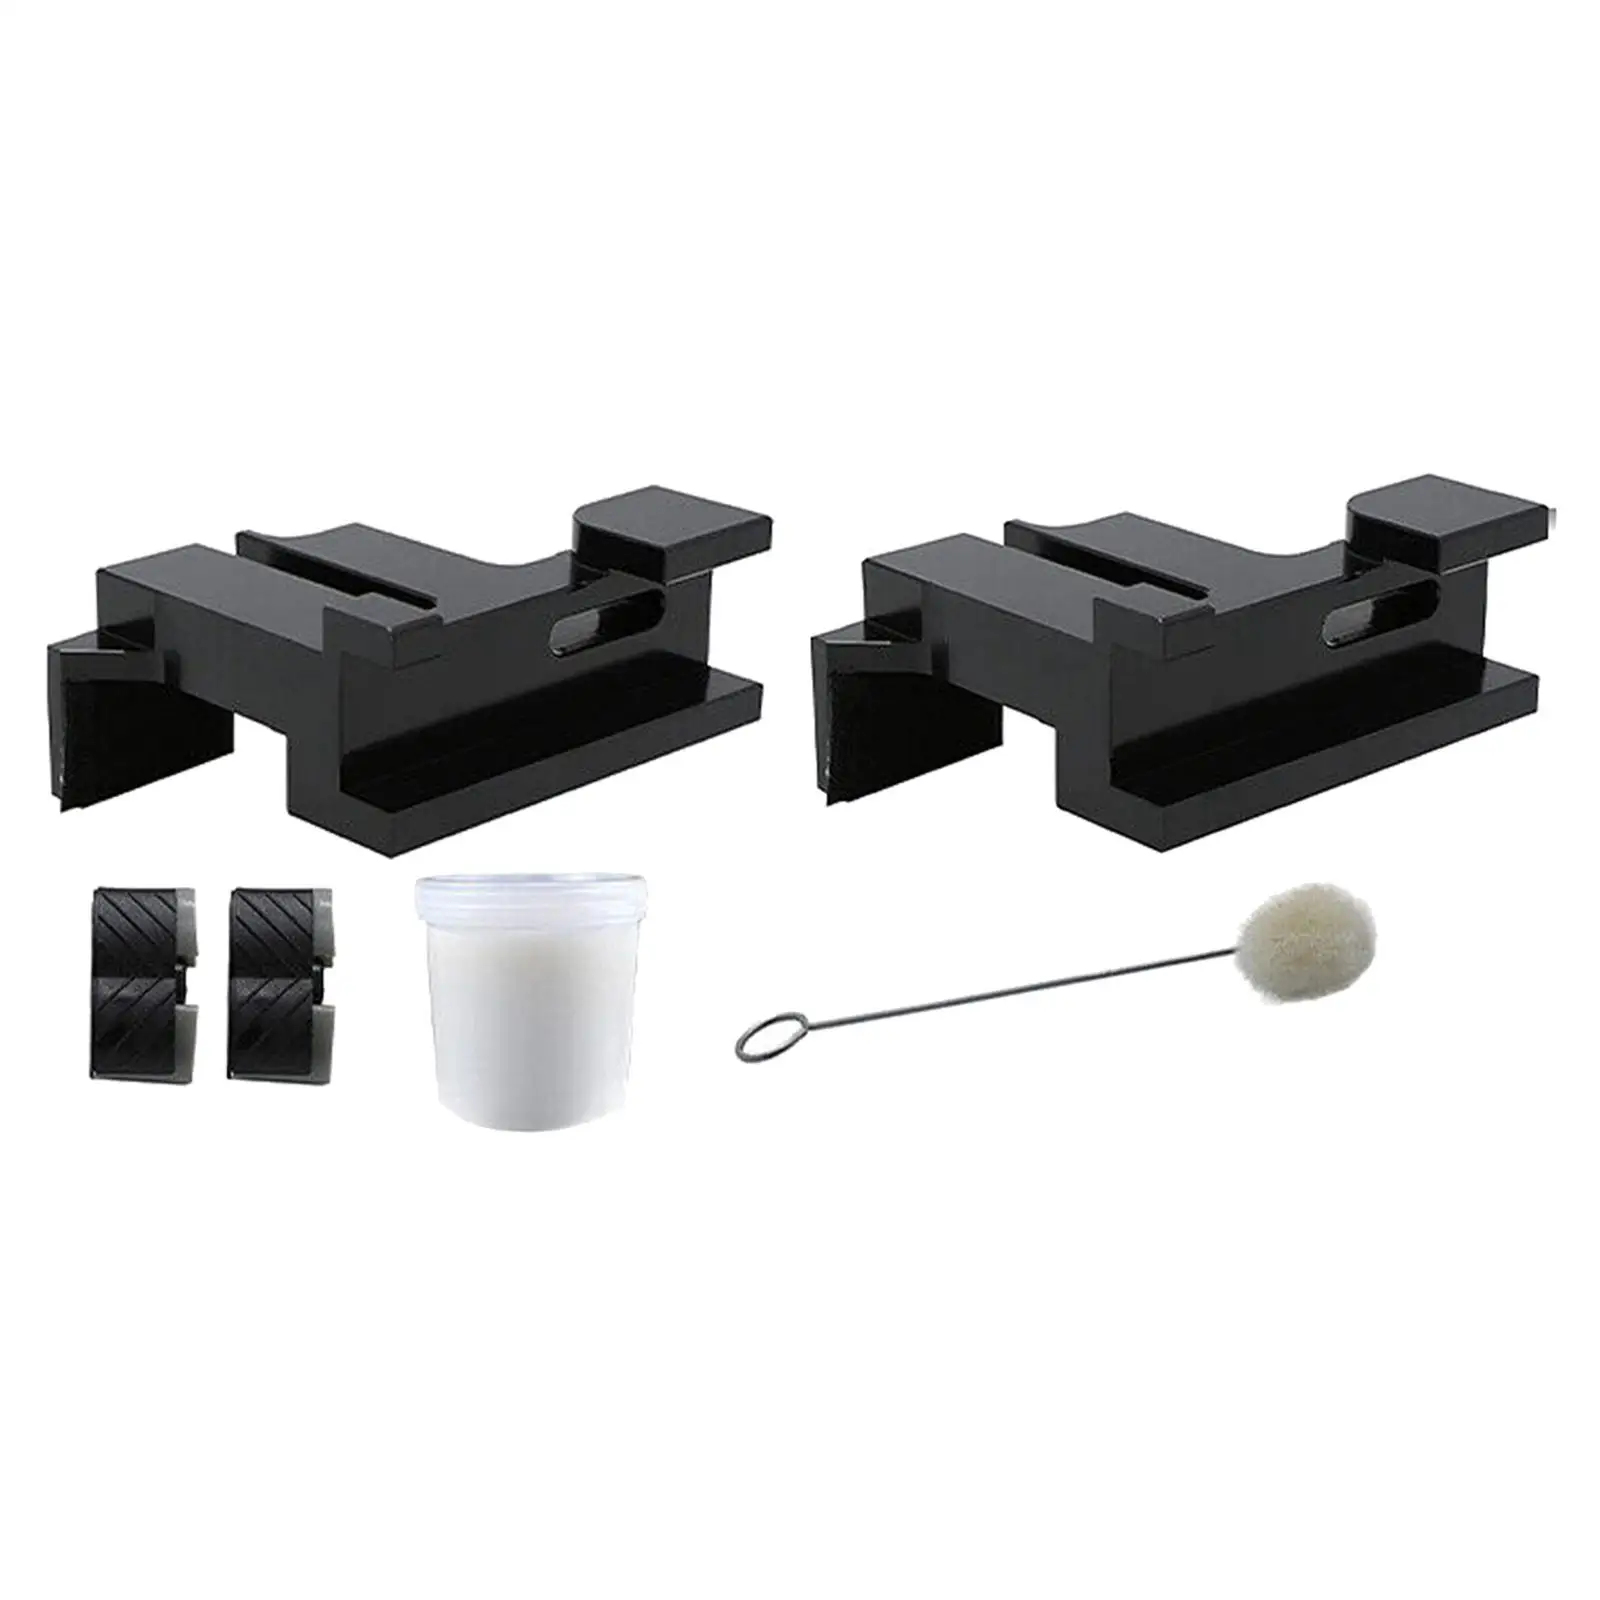 Sunroof Track Assembly Repair Set Easy to Install Sunroof Rails Repair Set Replaces Part for Lincoln Mkt (2010-2018)